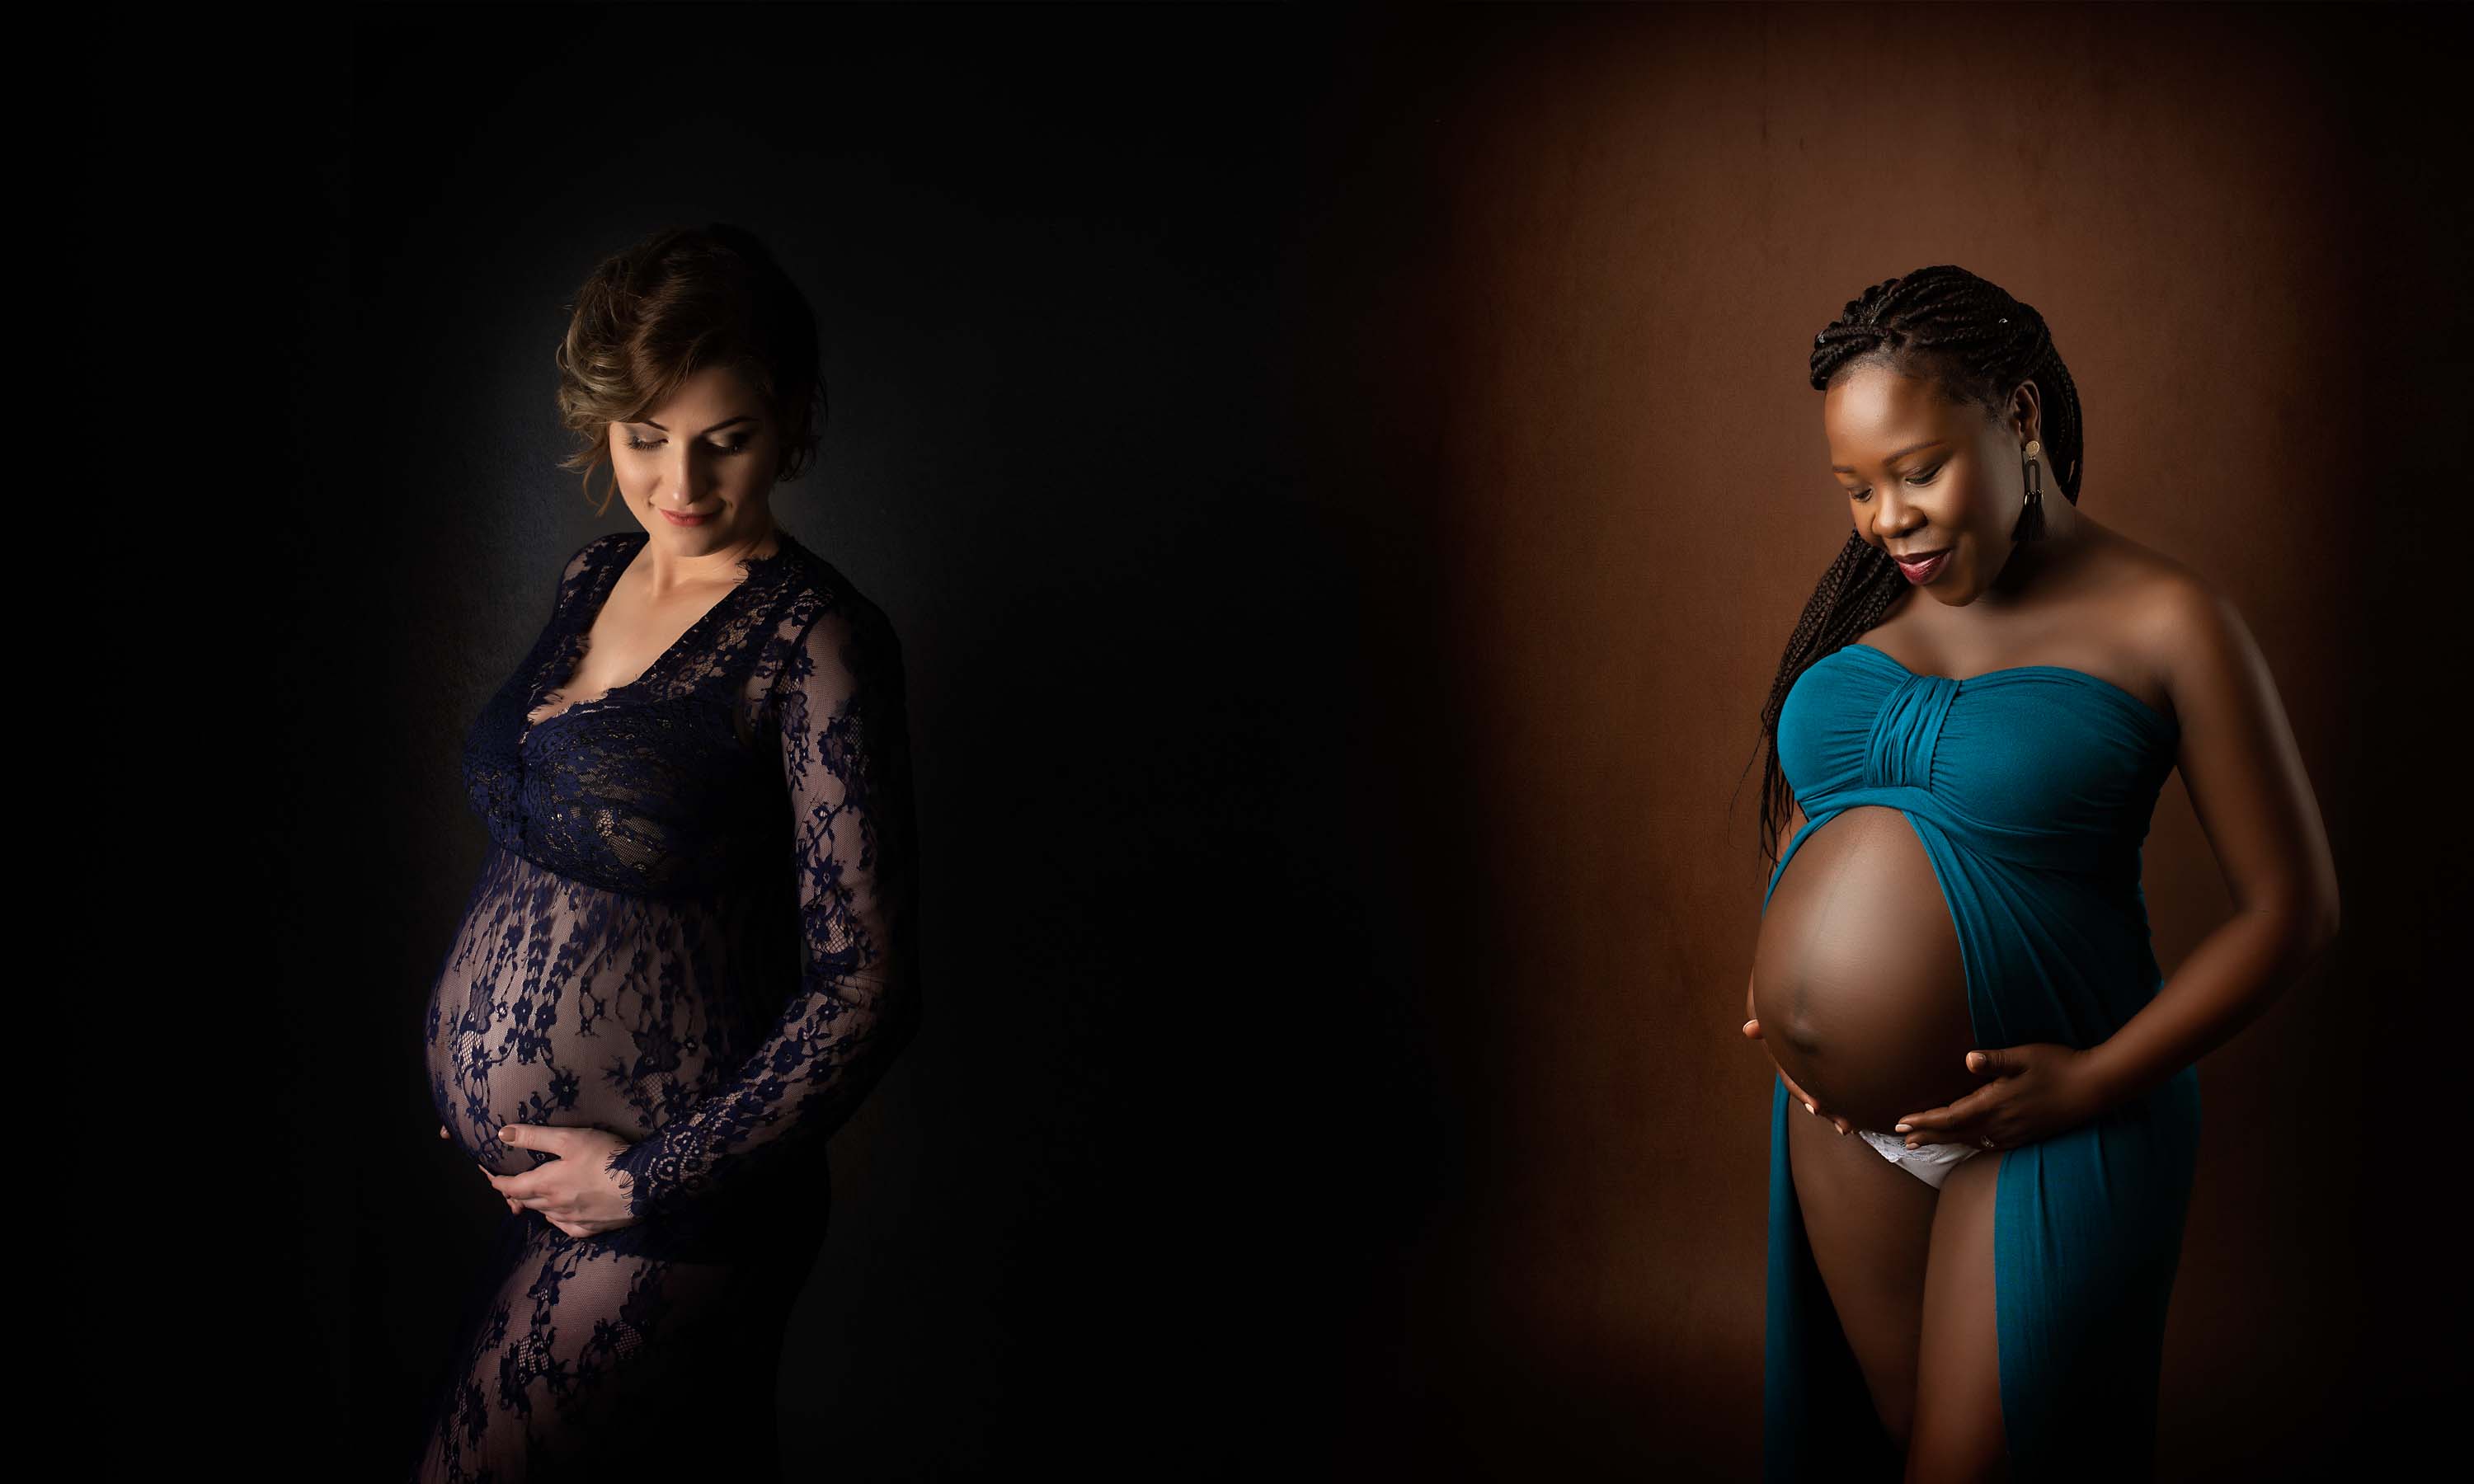 Maternity photography for one lady in a blue dress and one lady in a teal gown